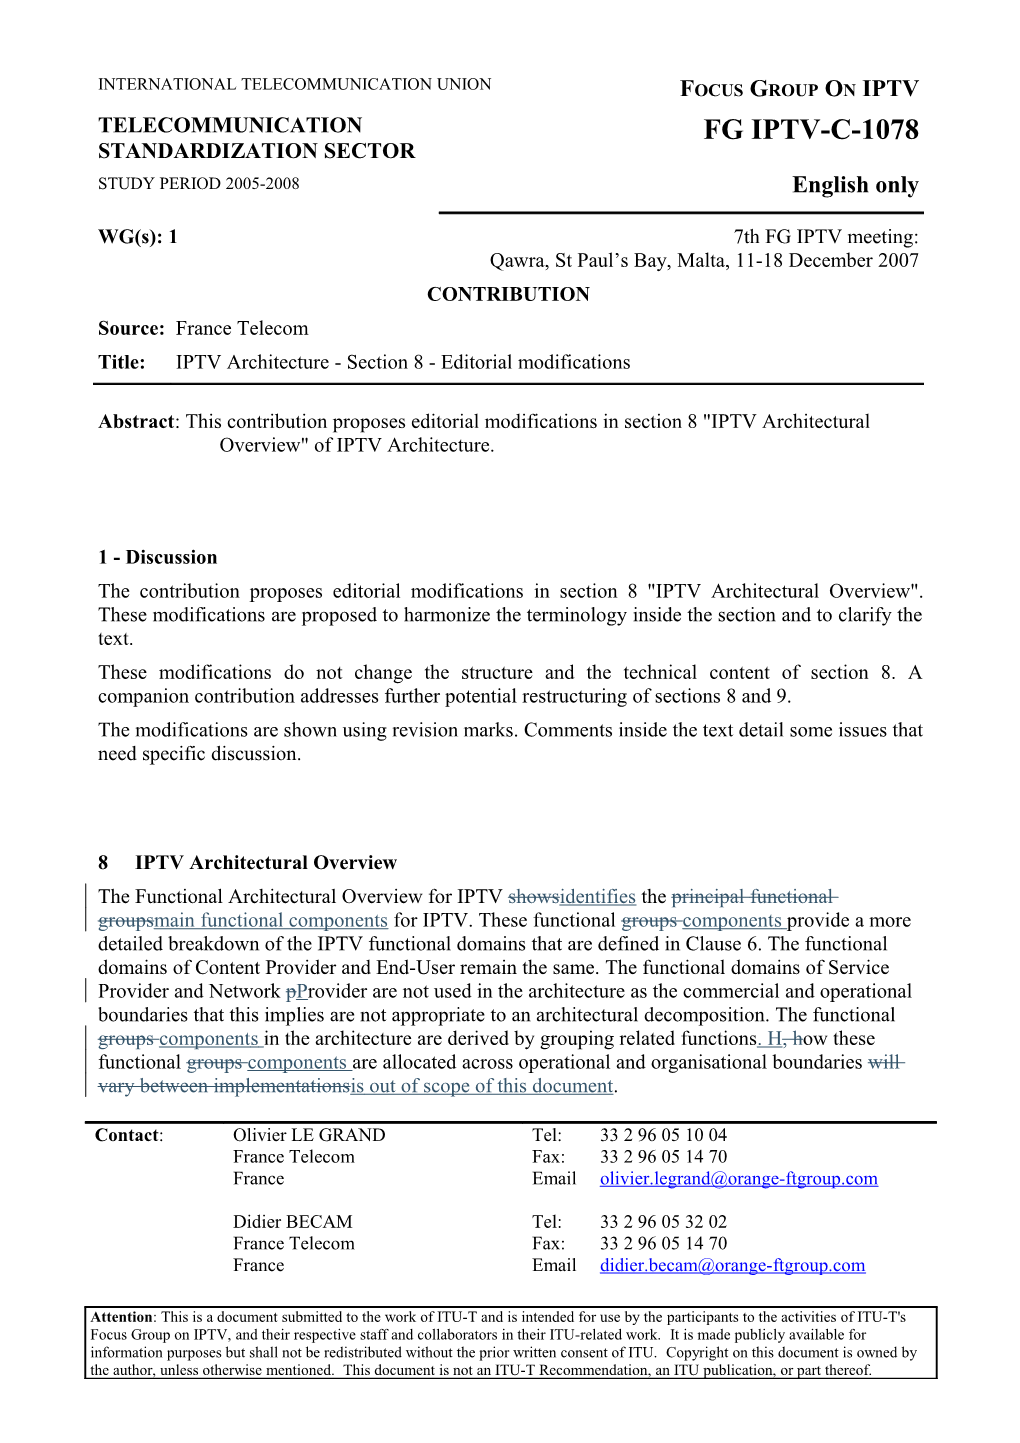 Abstract: This Contribution Proposes Editorial Modifications in Section 8 IPTV Architectural